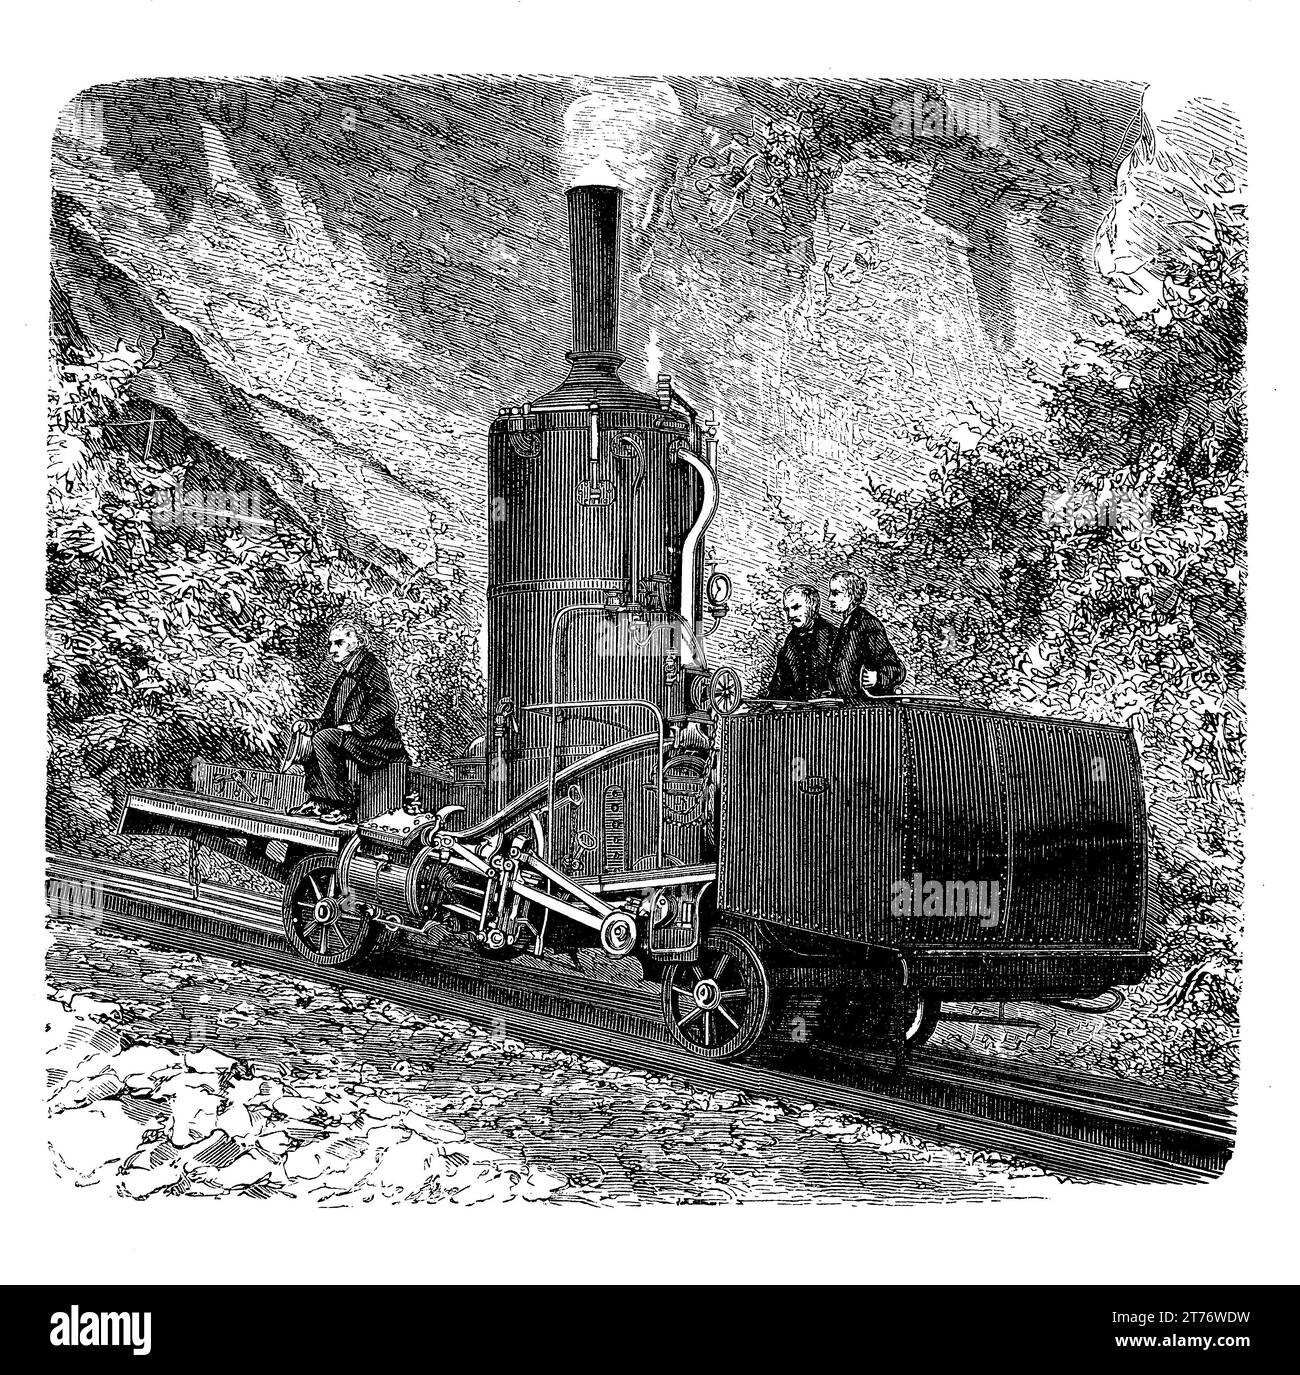 Rigi railway opened in 1873 to reach the summit of mount Rigi in Switzerland, with a locomotive with vertical boiler working on system of toothed racks set between the railway tracks interlocking with cogwheels fitted under the locomotive Stock Photo